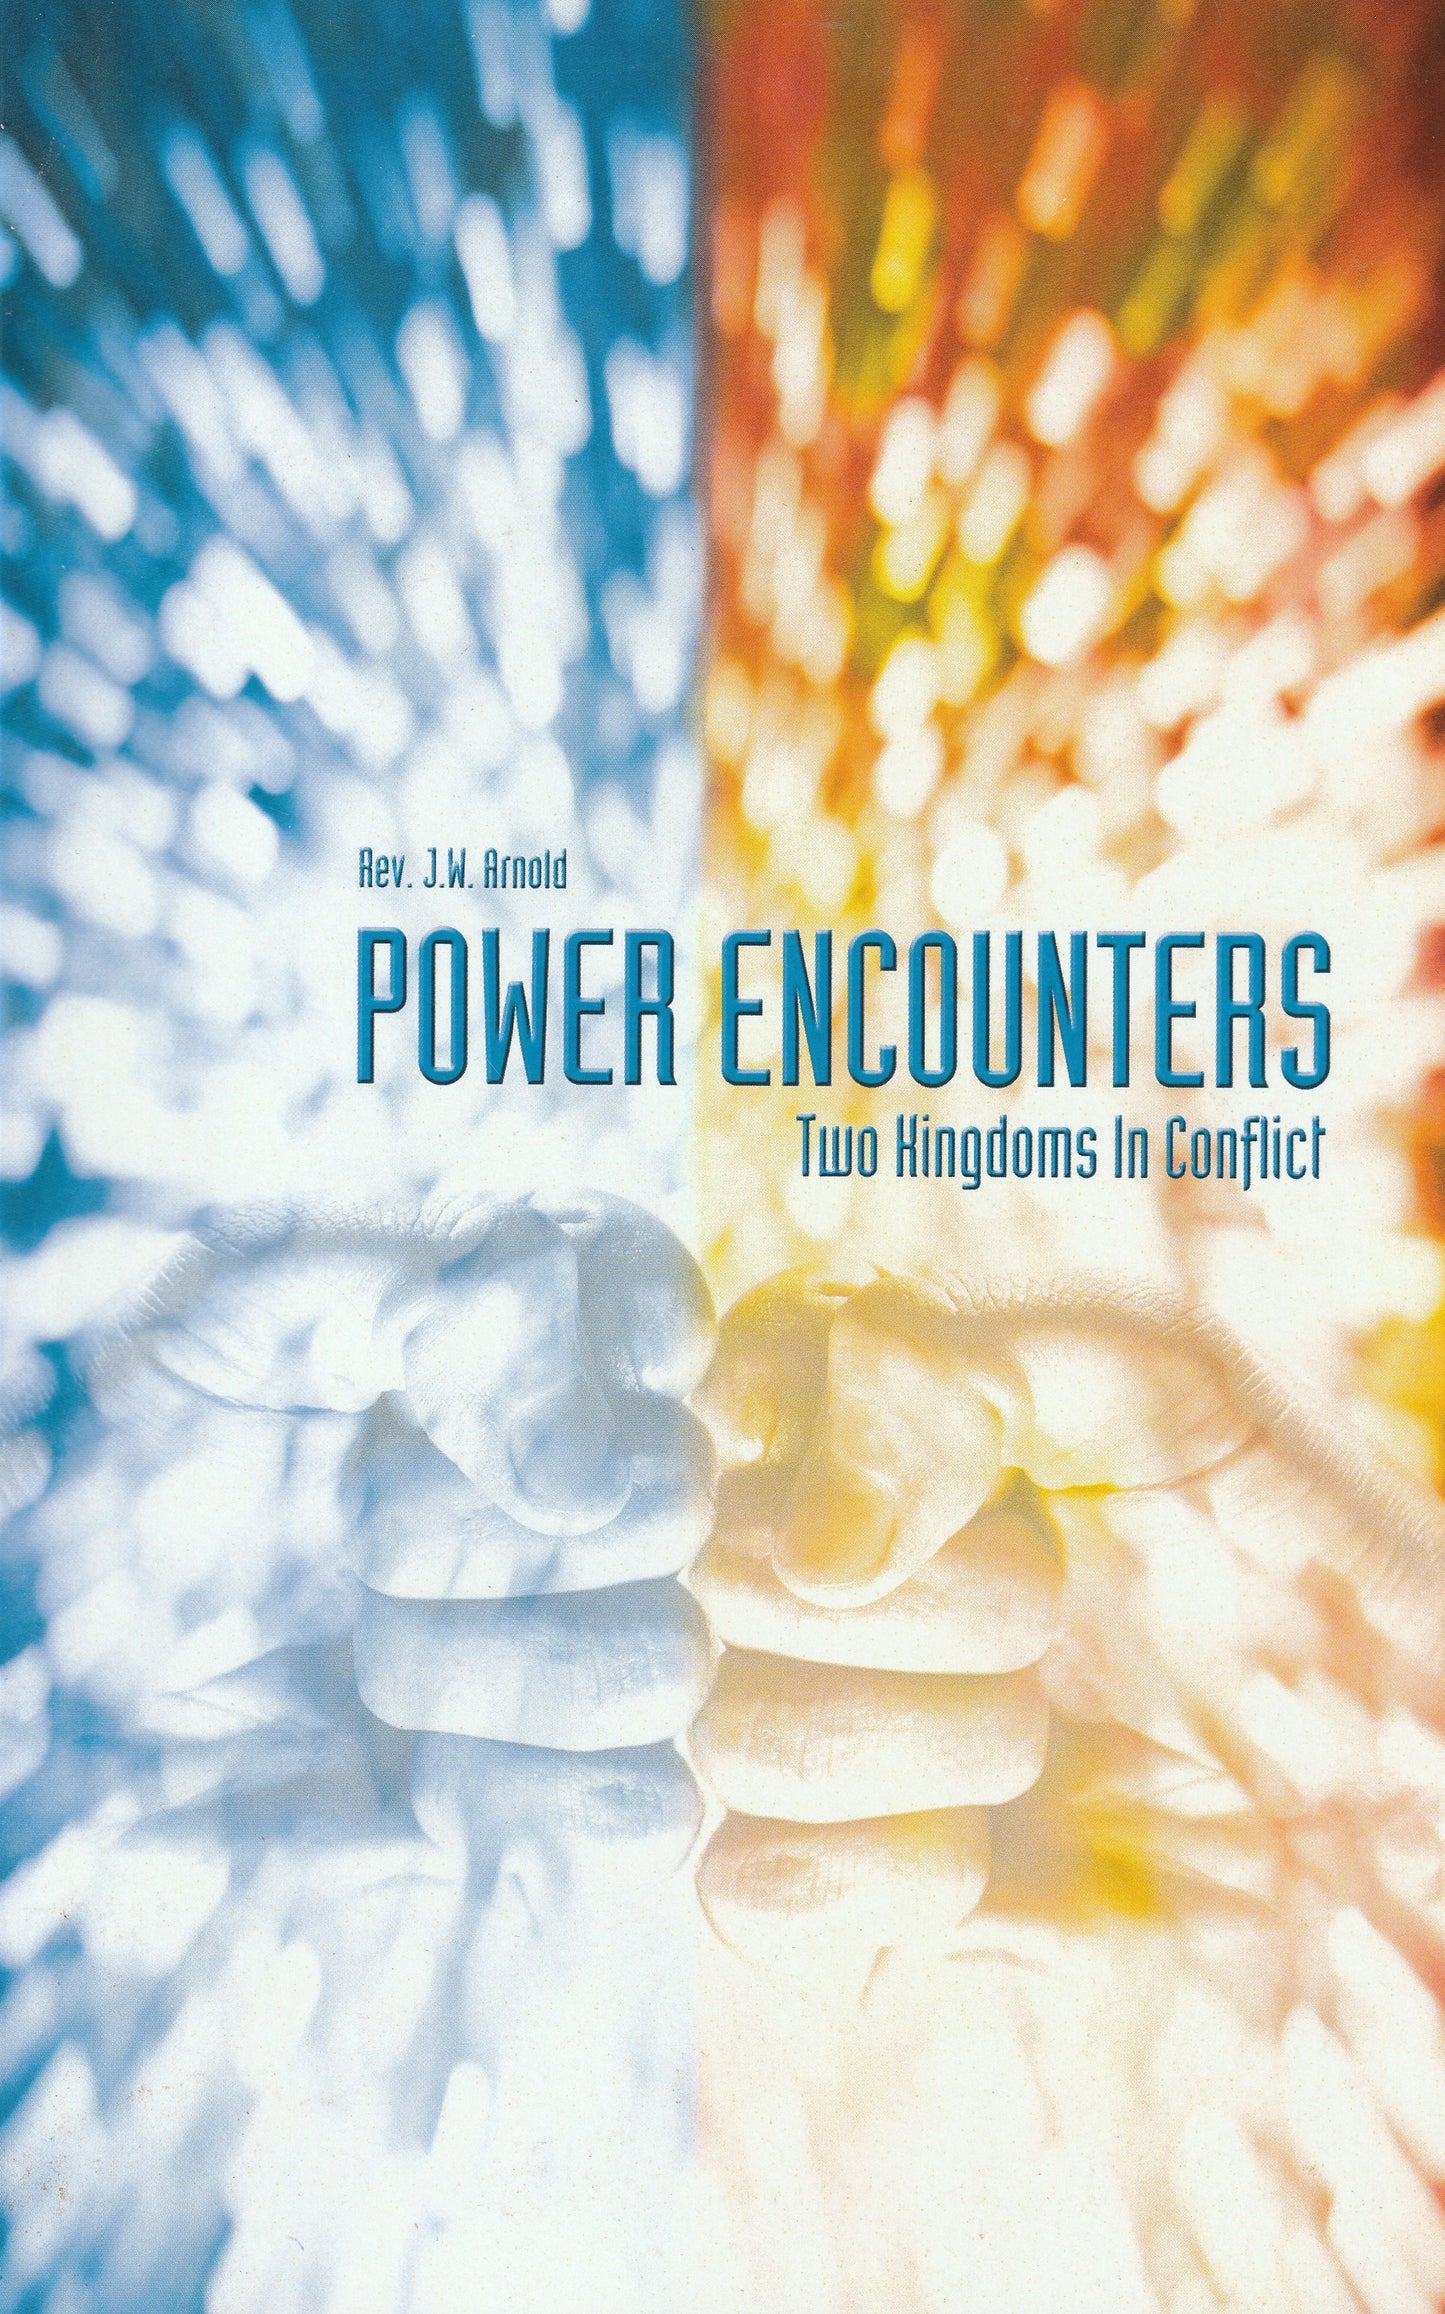 Power Encounters ~ Two Kingdoms In Conflict     -  137 Pages  -  $12